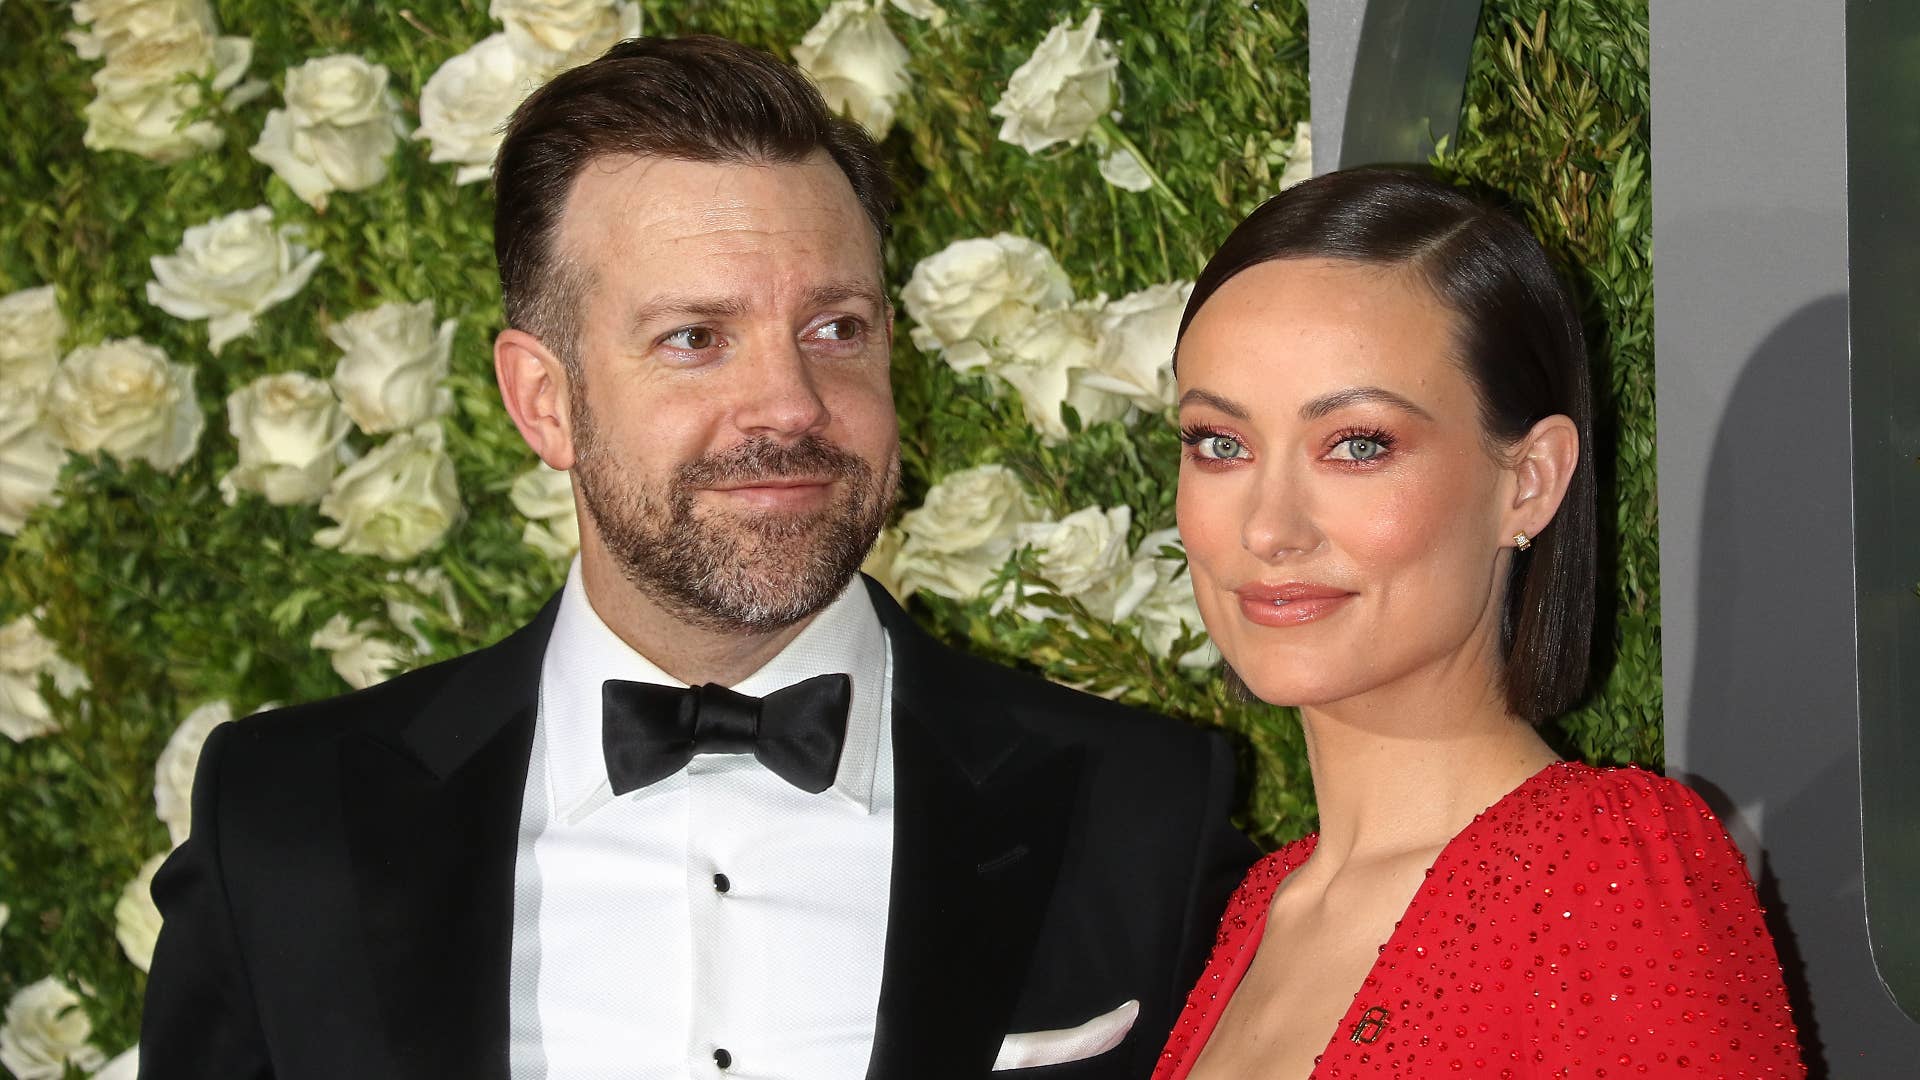 Jason Sudeikis and Olivia Wilde attend the 71st Annual Tony Awards.